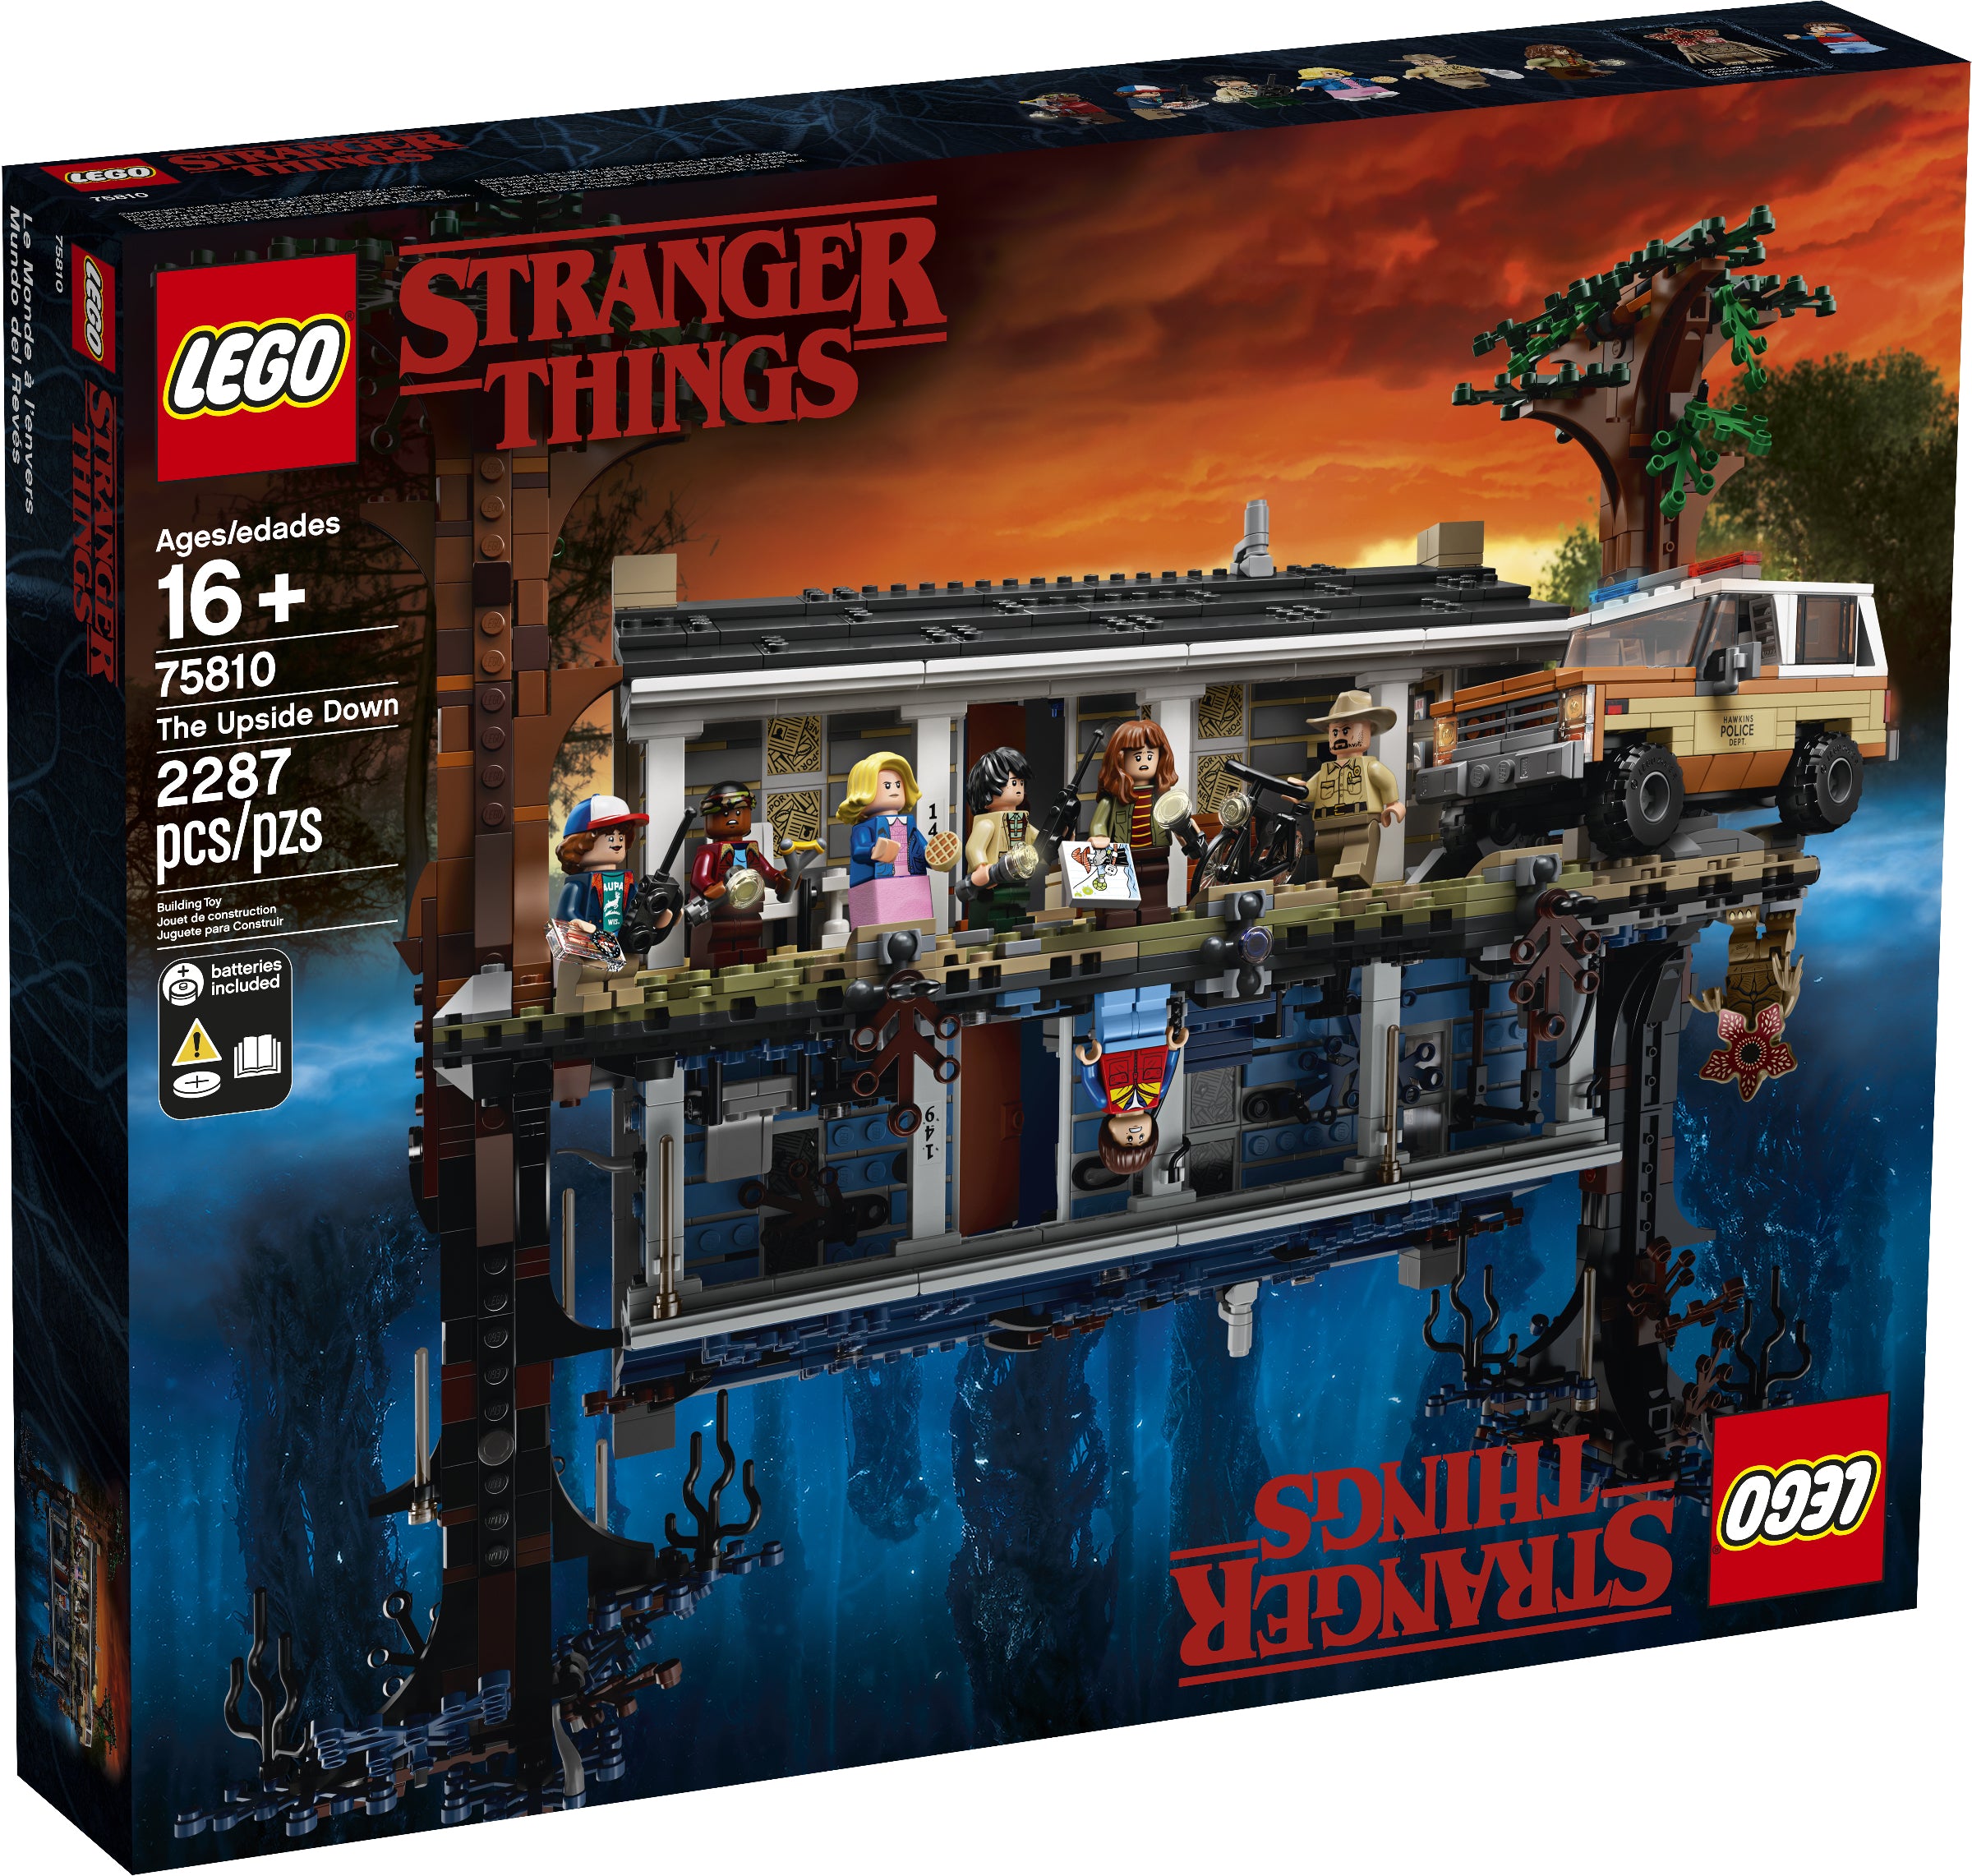 Lego Exclusive 75810 - Stranger Things The Upside Down